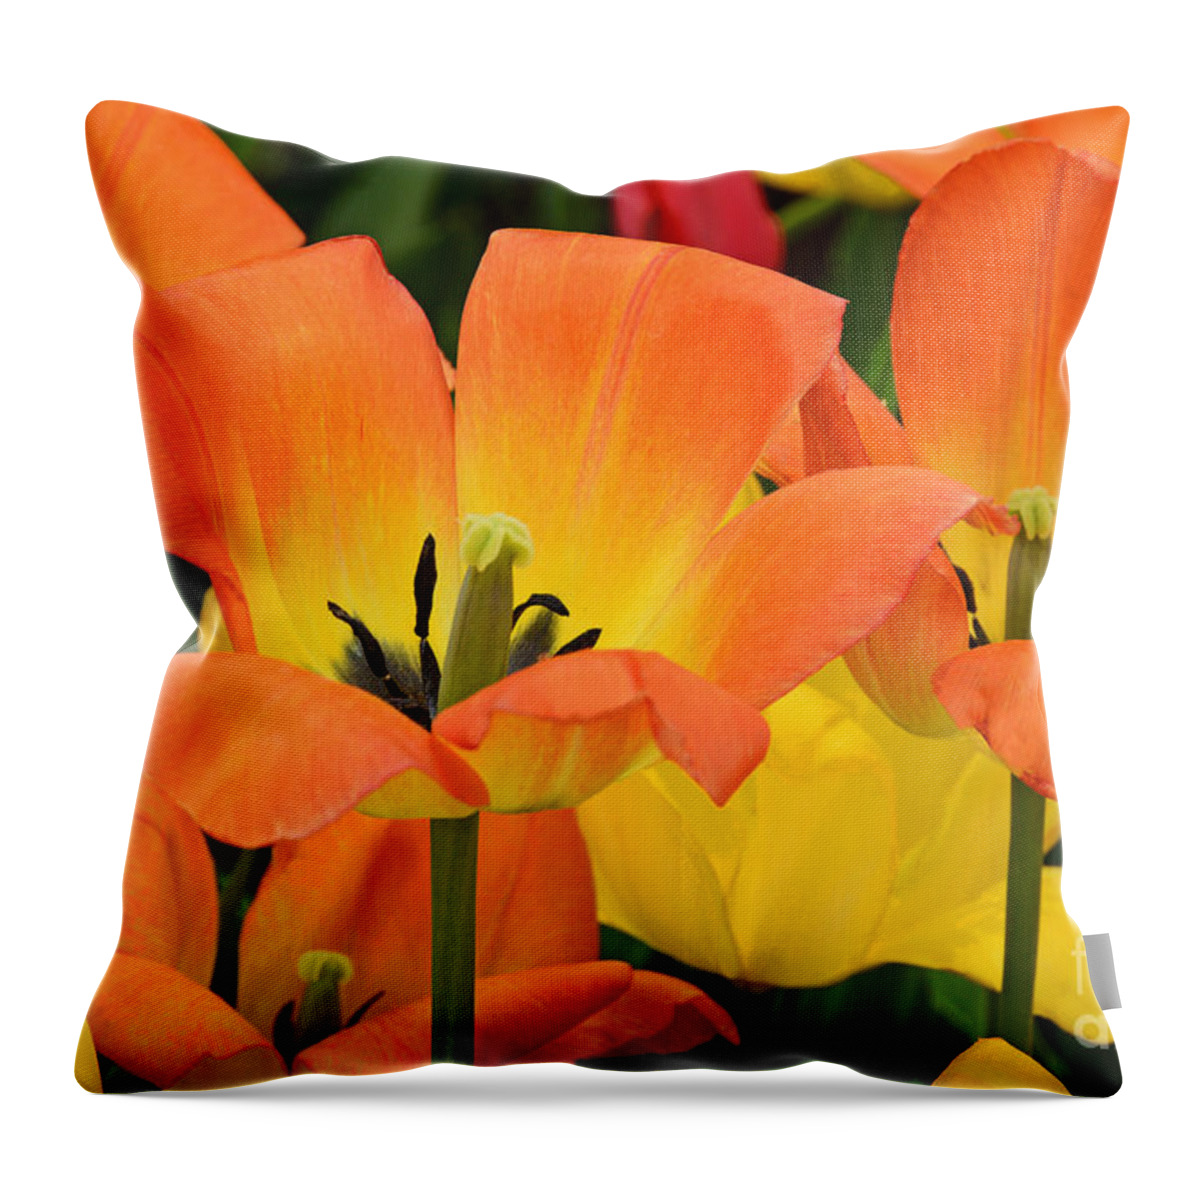 Tulip Throw Pillow featuring the photograph Tantalizing Tulips by Regina Geoghan